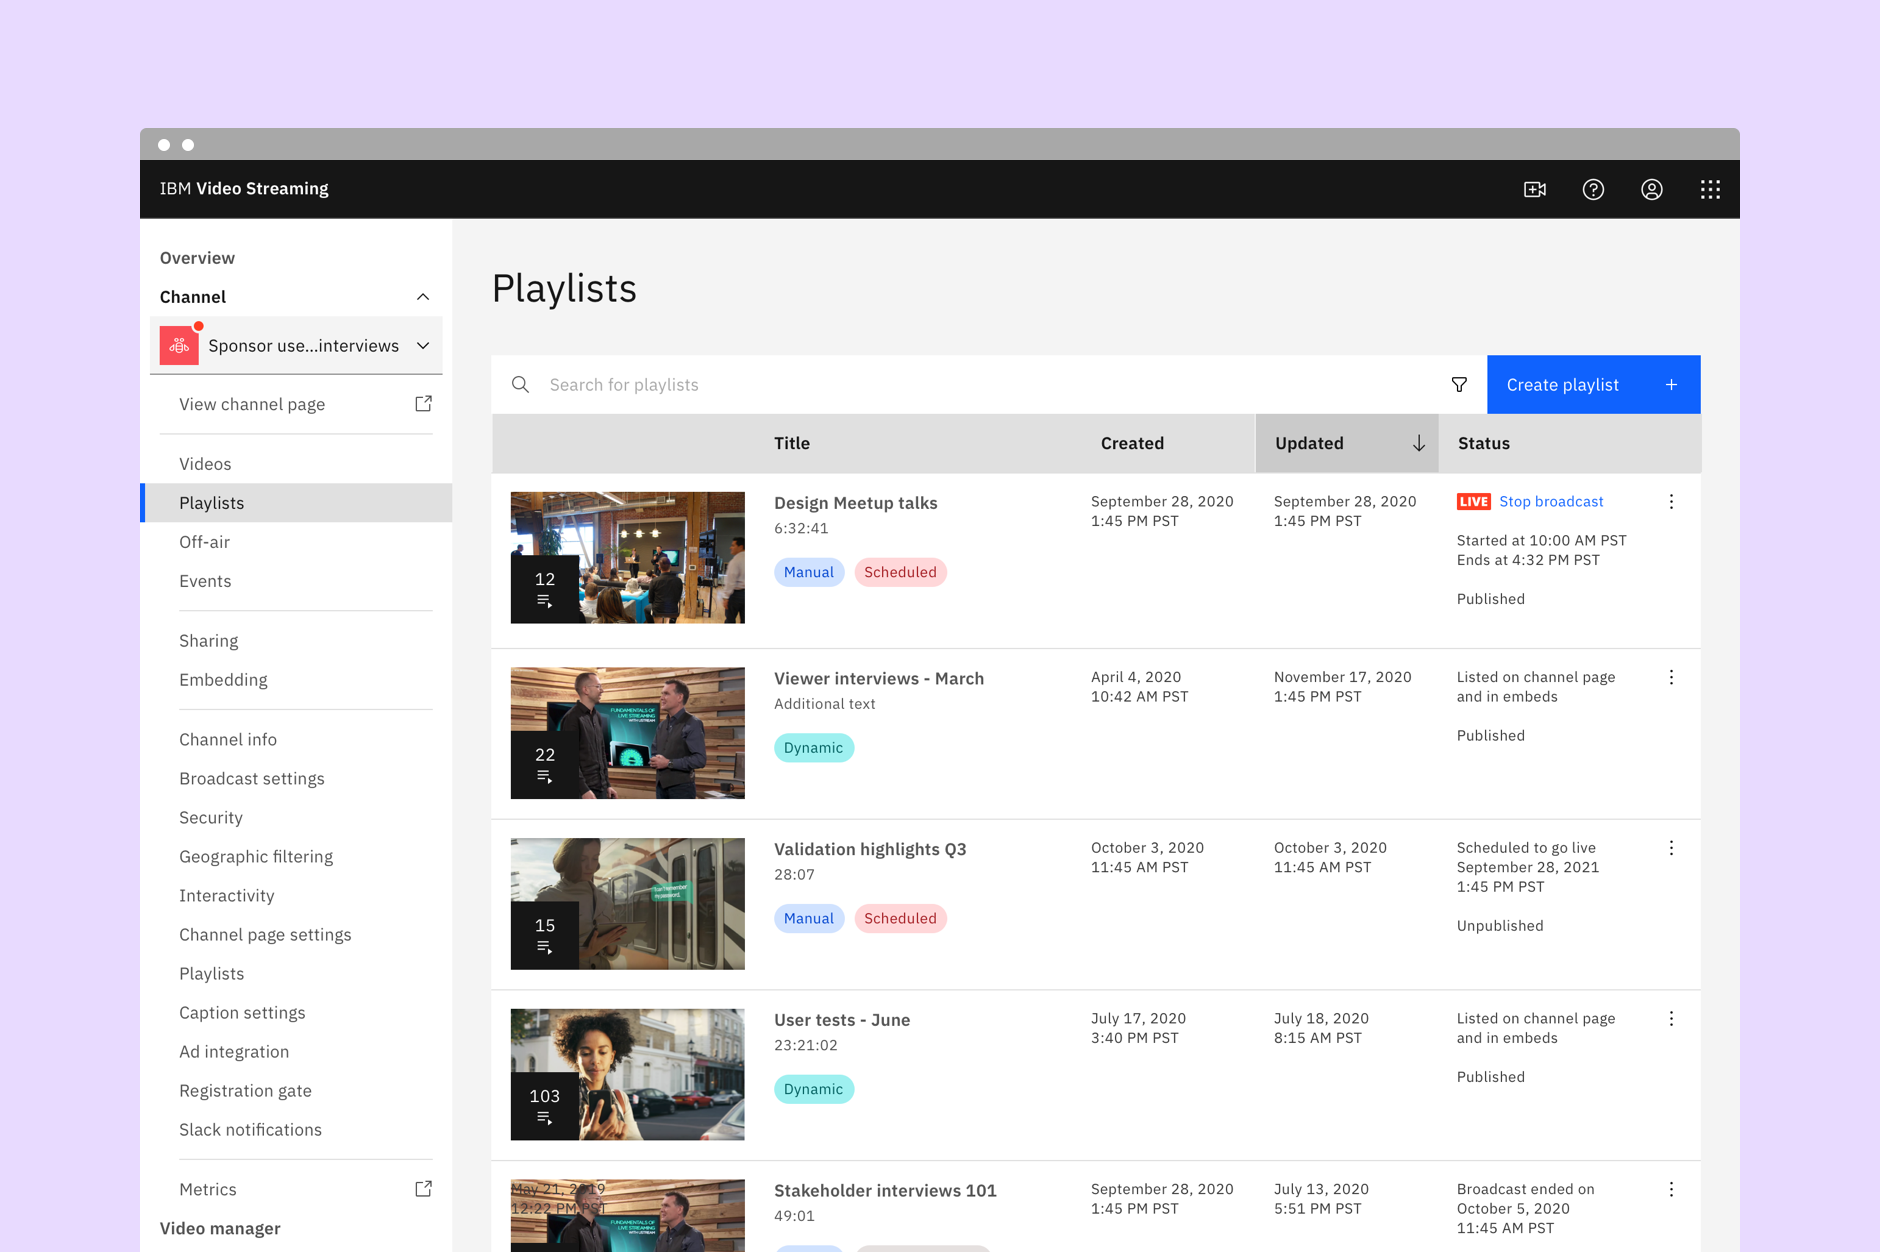 Live and On-Demand Playlists for video playback